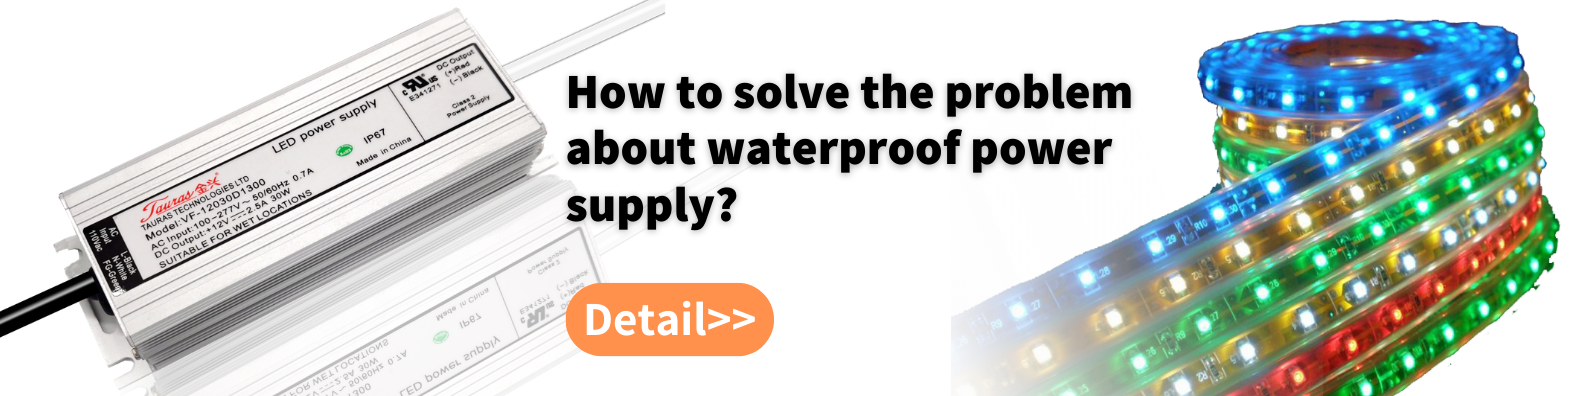 how to solve the problems about waterproof power supply